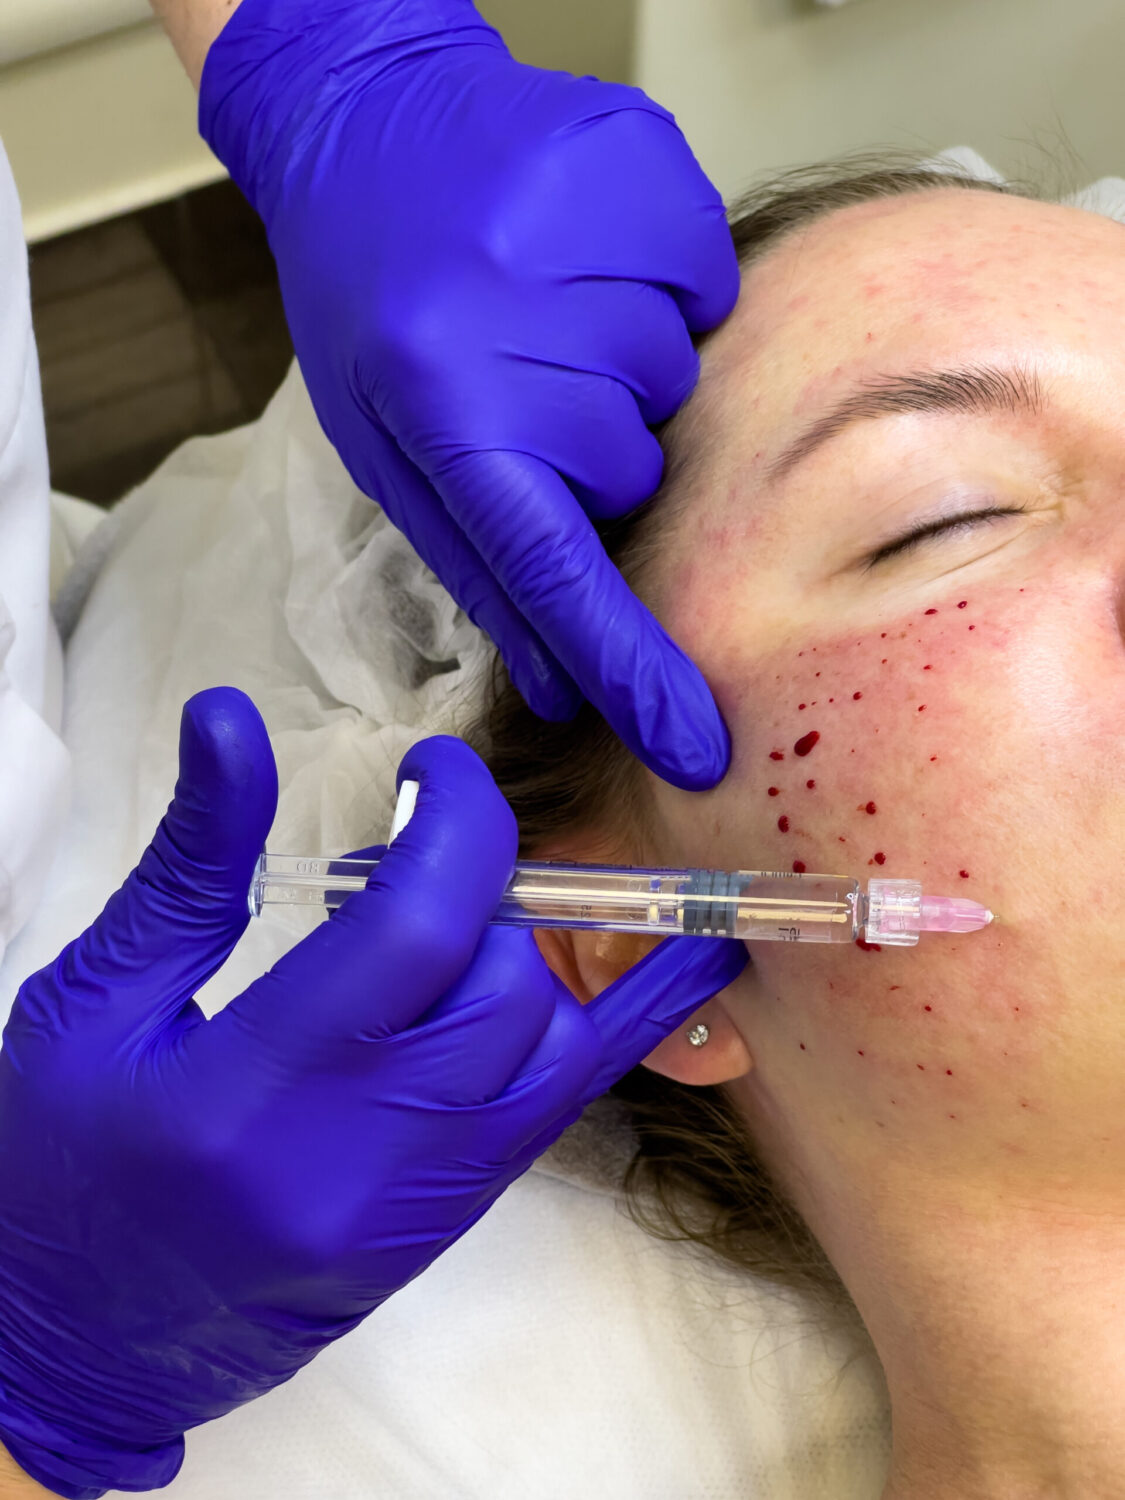 The doctor cosmetologist makes mesotherapy or biorevitalization procedure of a beautiful woman in a beauty salon. Face skin rejuvenation and contouring, mesotherapy and biorevitalization. Injection traces. Woman face in the process of biorevitalization procedure. Multiple injection marks are visible on the skin. Cosmetology skin care.